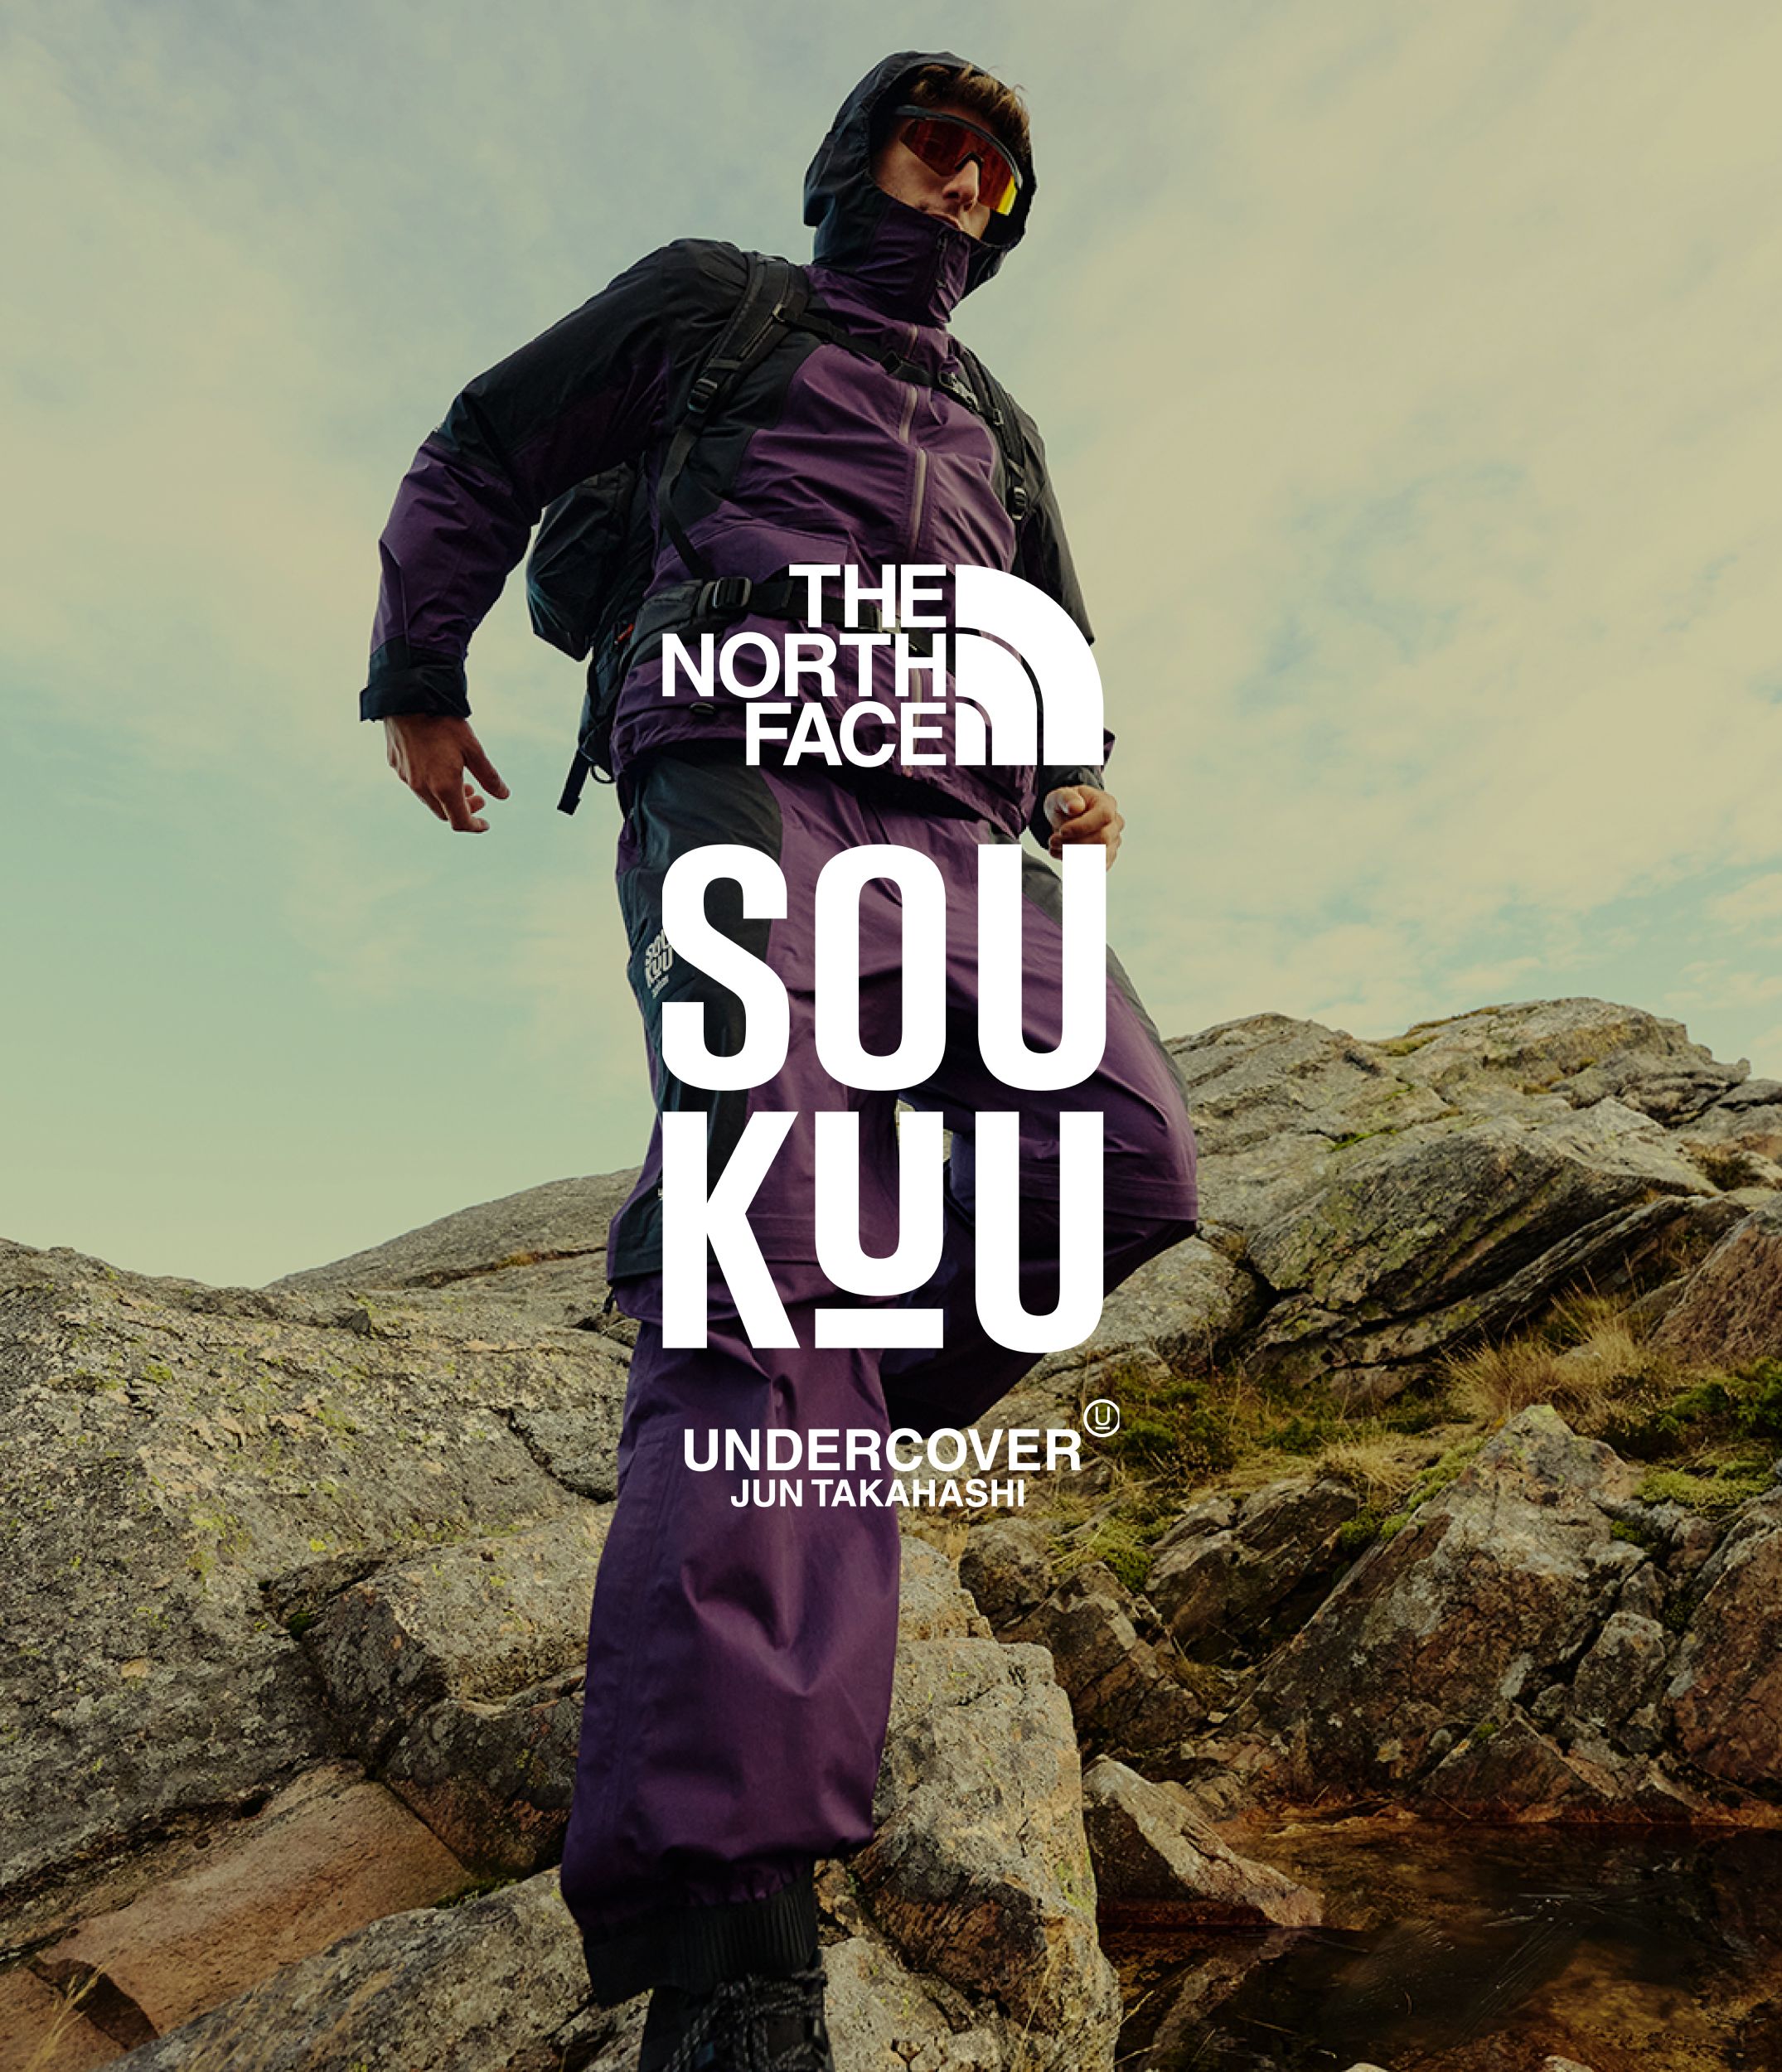 The North Face Explorer Filippo Zanobi wearing pieces from the SOUKUU collection.